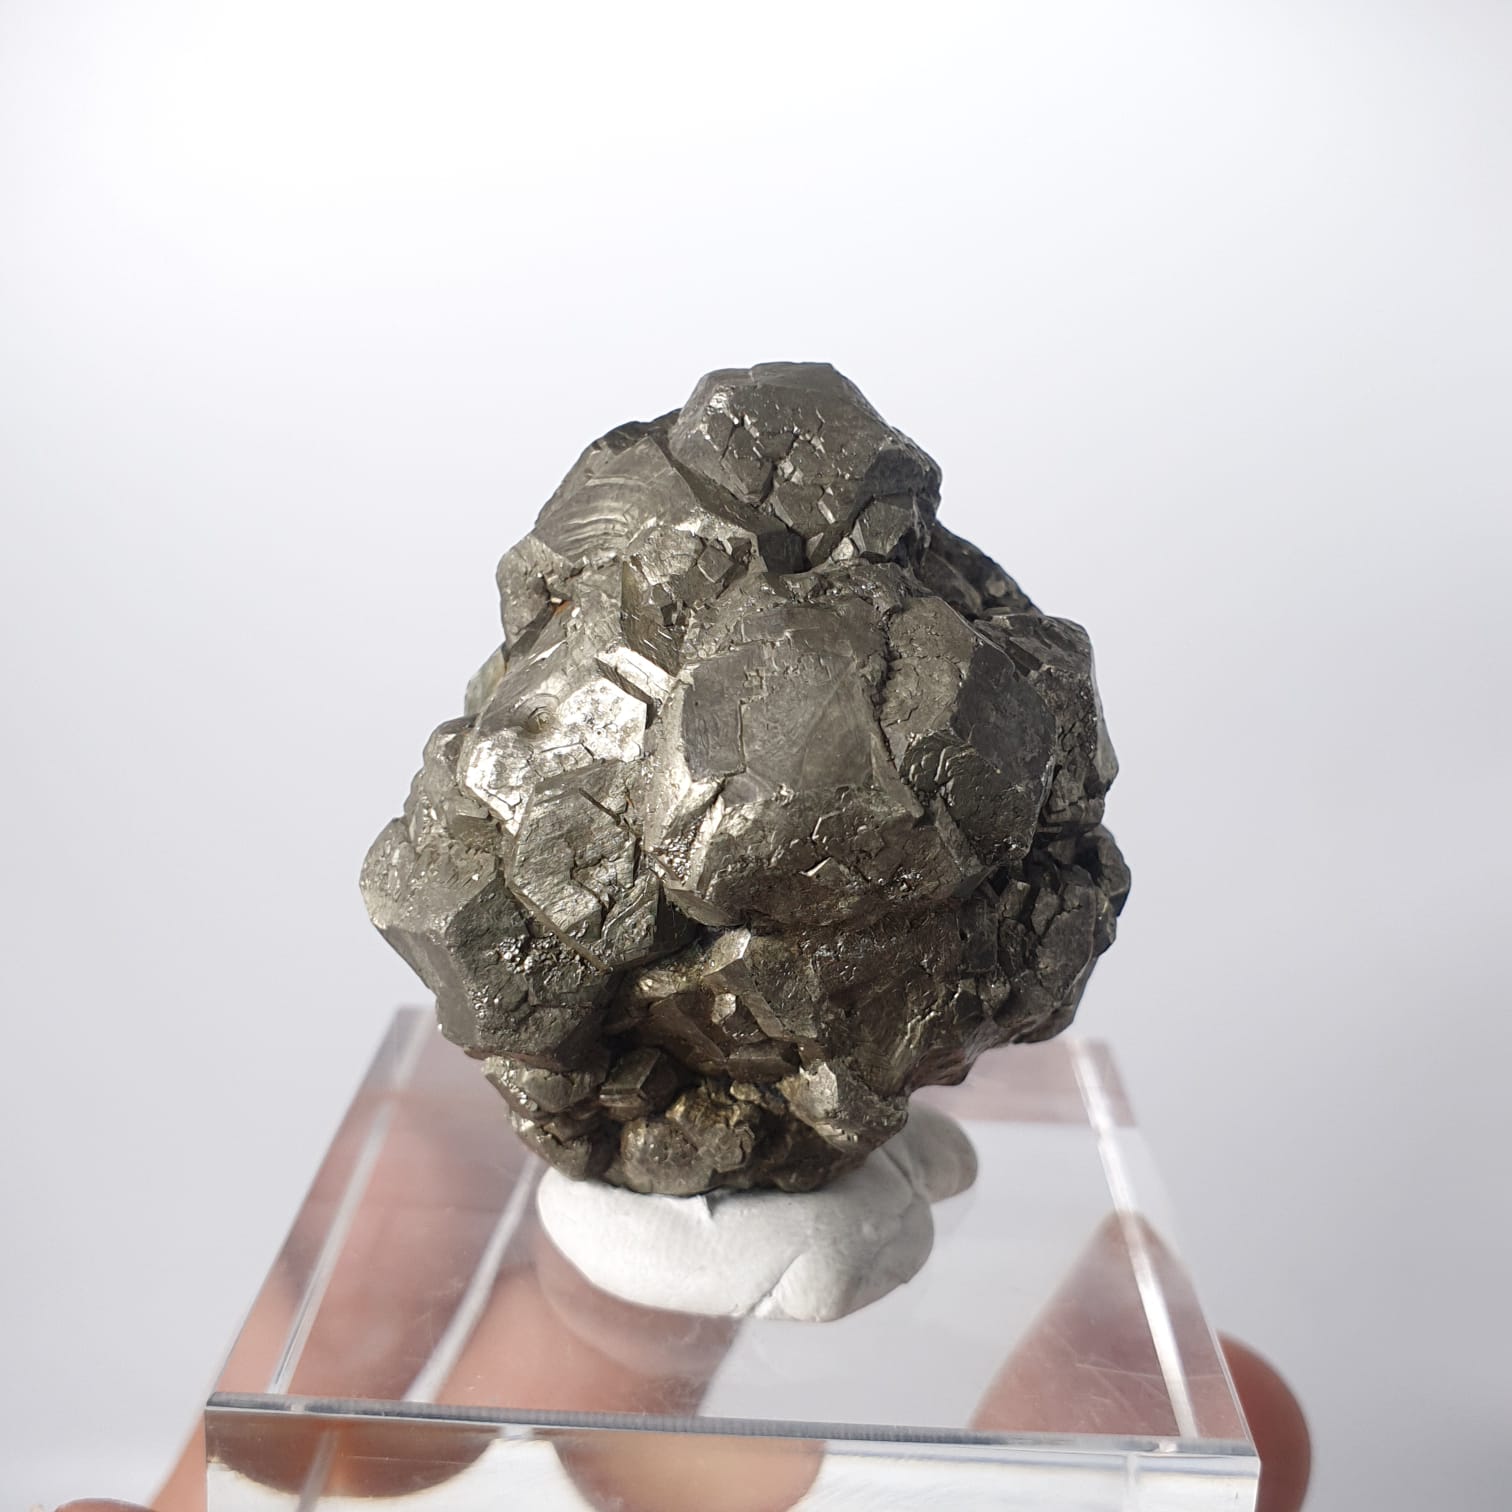 Lovely Metallic Aggregate of Pyrite Intergrown Crystals